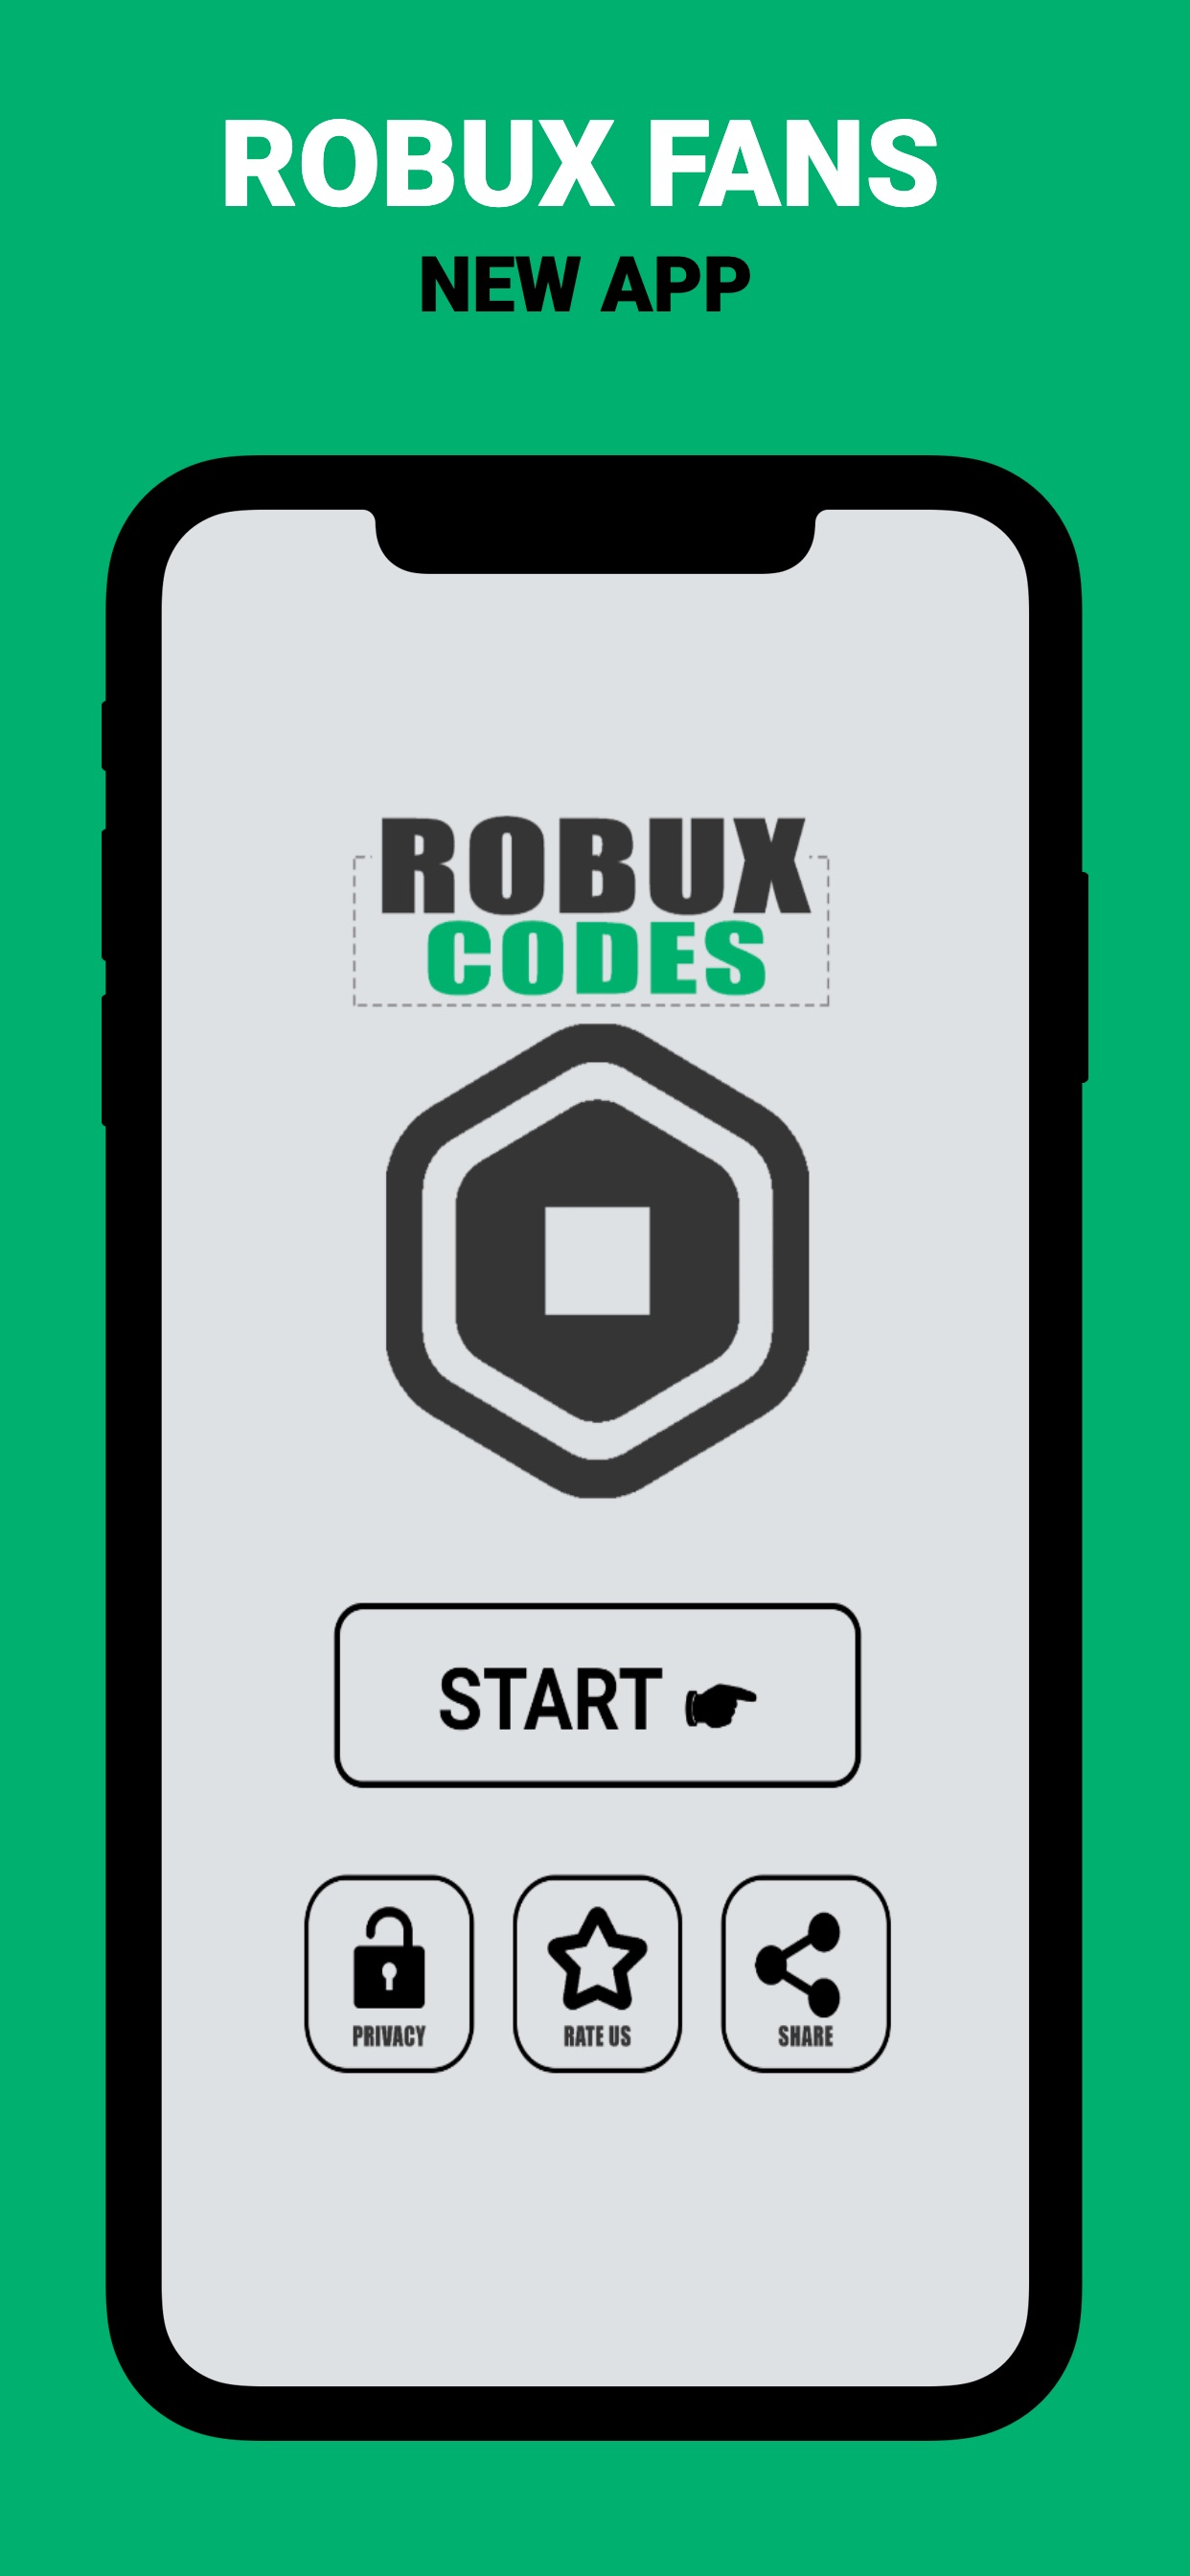 Robux Codes For Roblox App Store Review Aso Revenue Downloads Appfollow - where to buy roblox gift cards in hong kong robux codes on ios